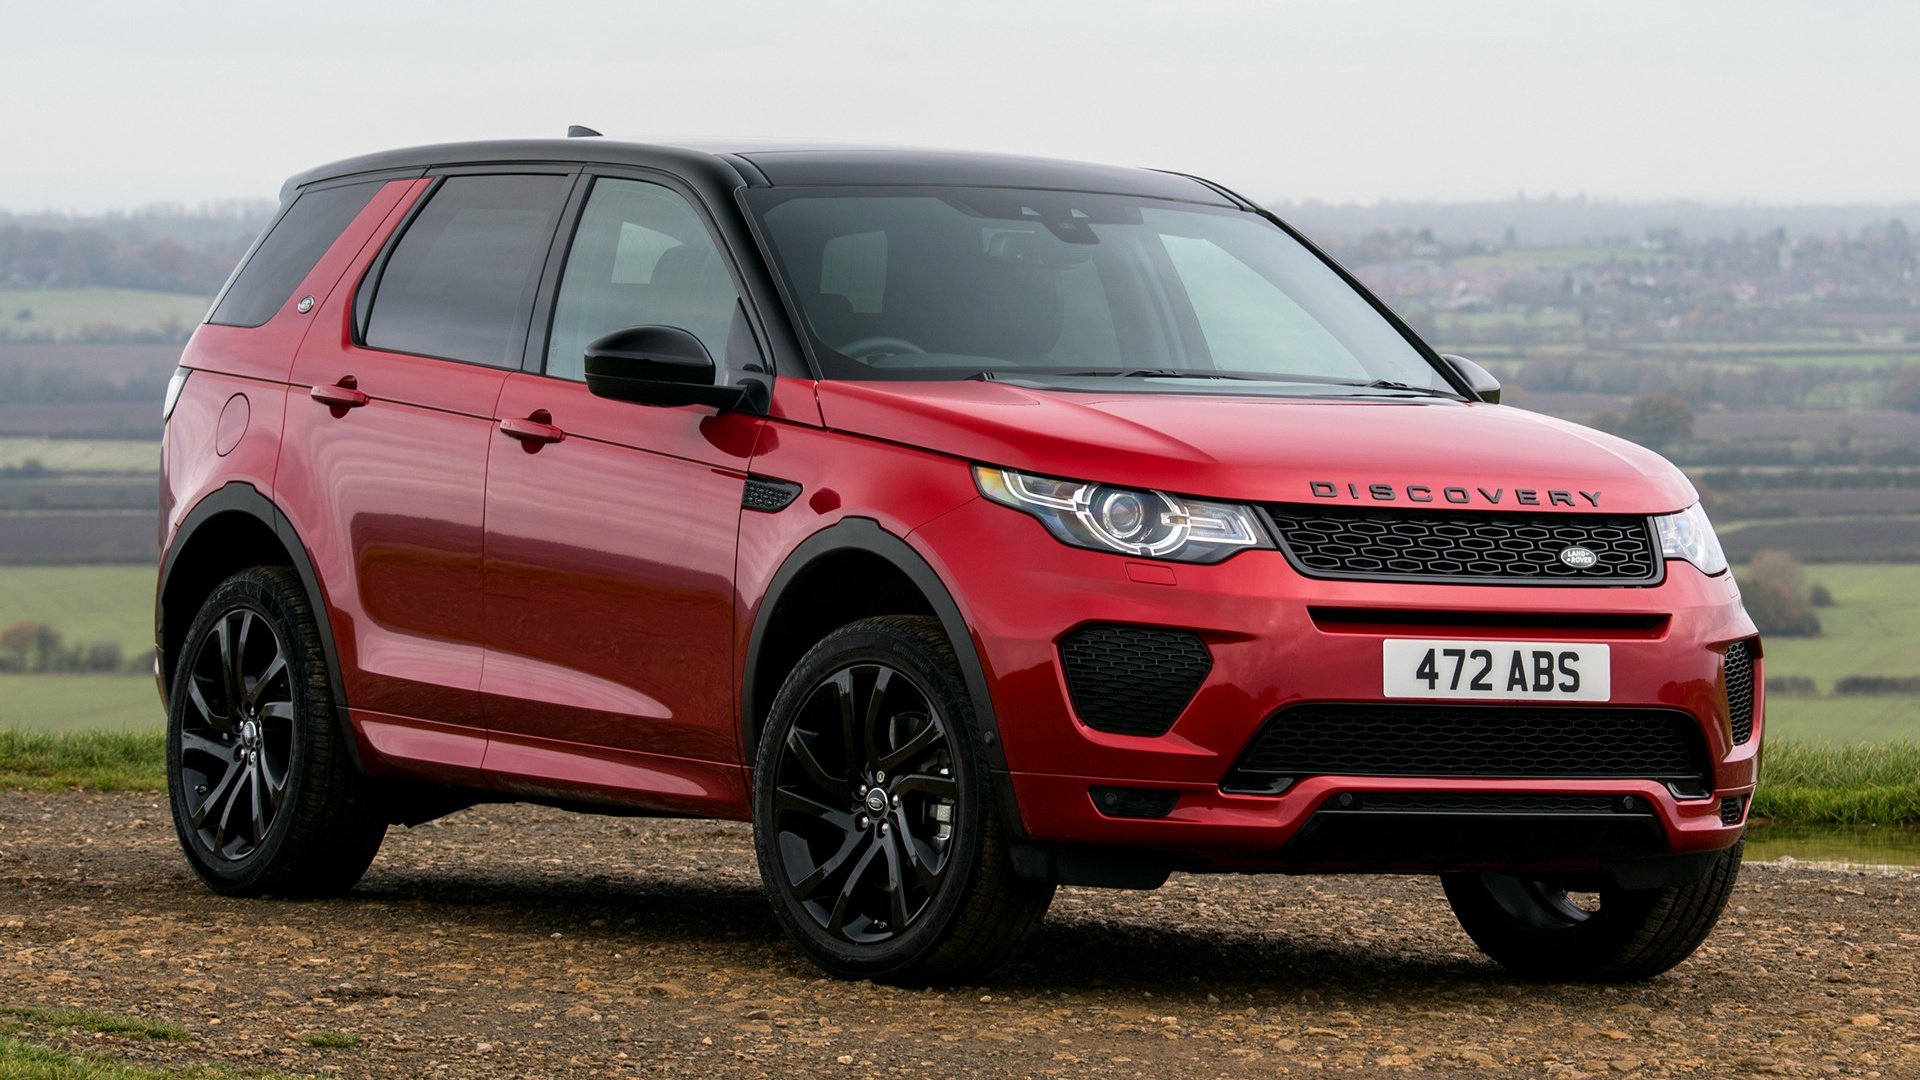 Car Crossover Car Land Rover Discovery Sport Dynamic Luxury Car Red Car Suv Subcompact Car 1920x1080